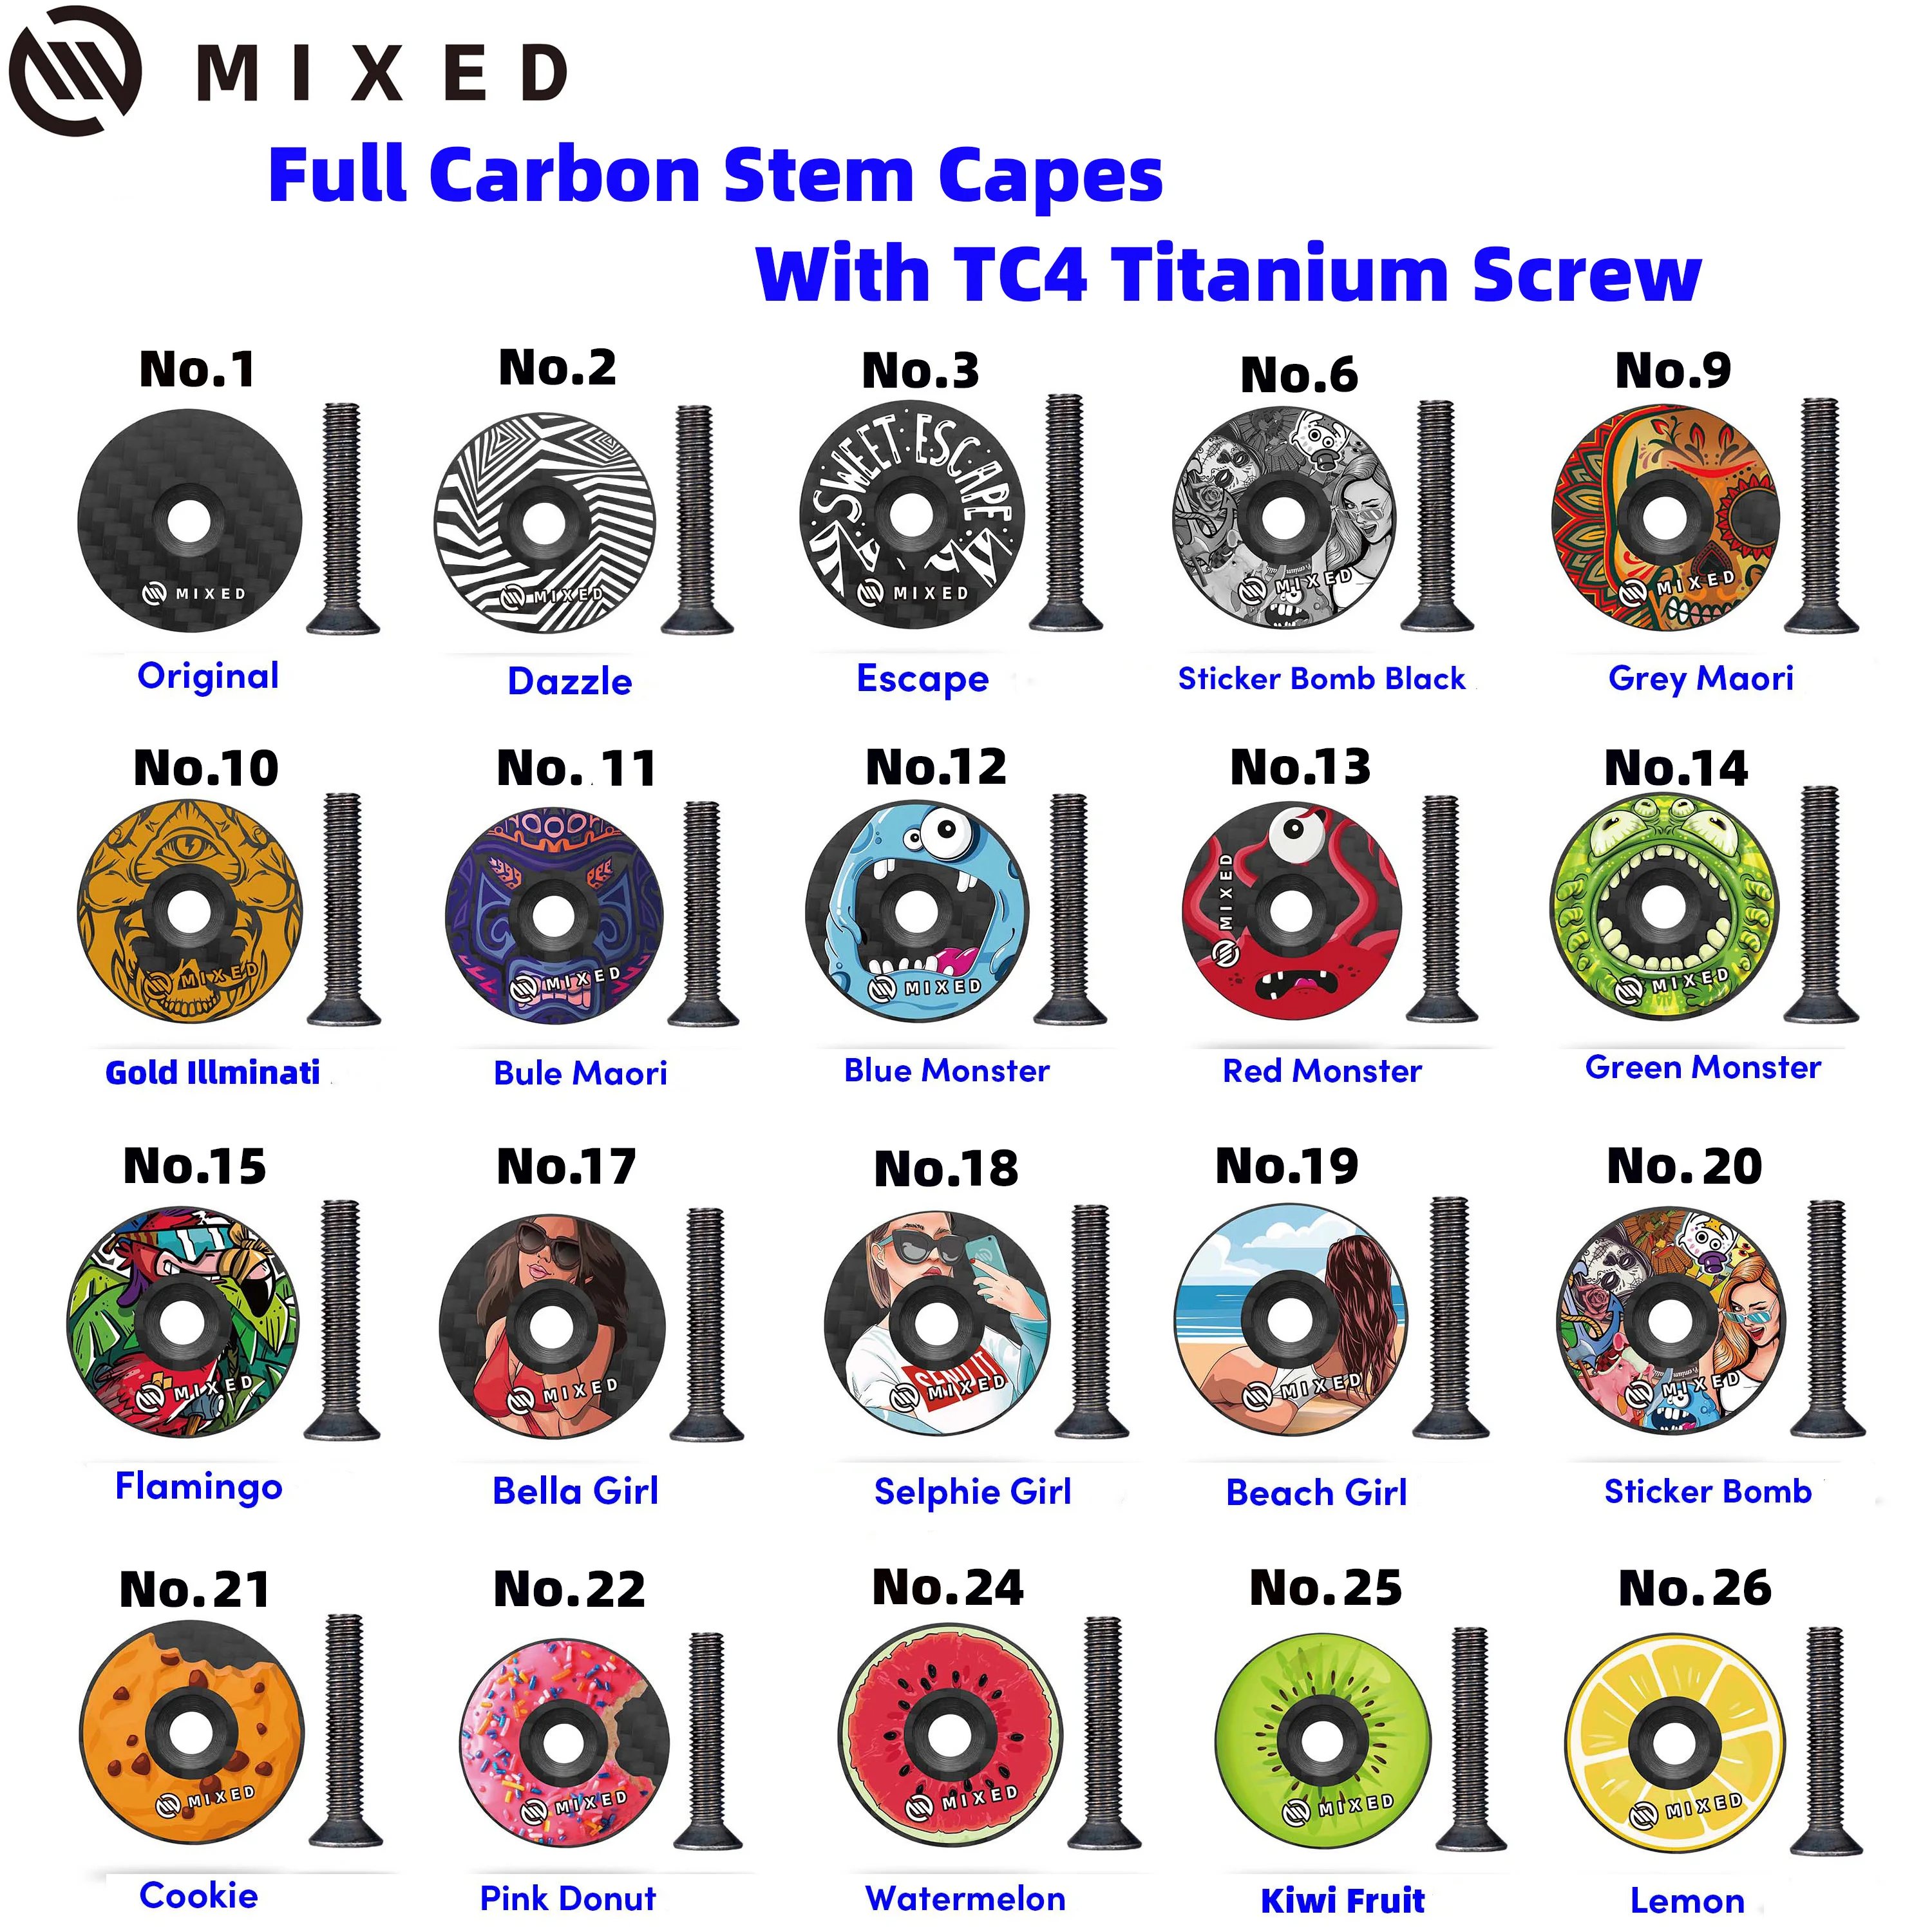 MIXED MTB Road Bike Bowl Cover Bicycle Stem Top Cap with Titanium Screws for 28.6mm Fork Tube Headset Cap Cycling Accessories